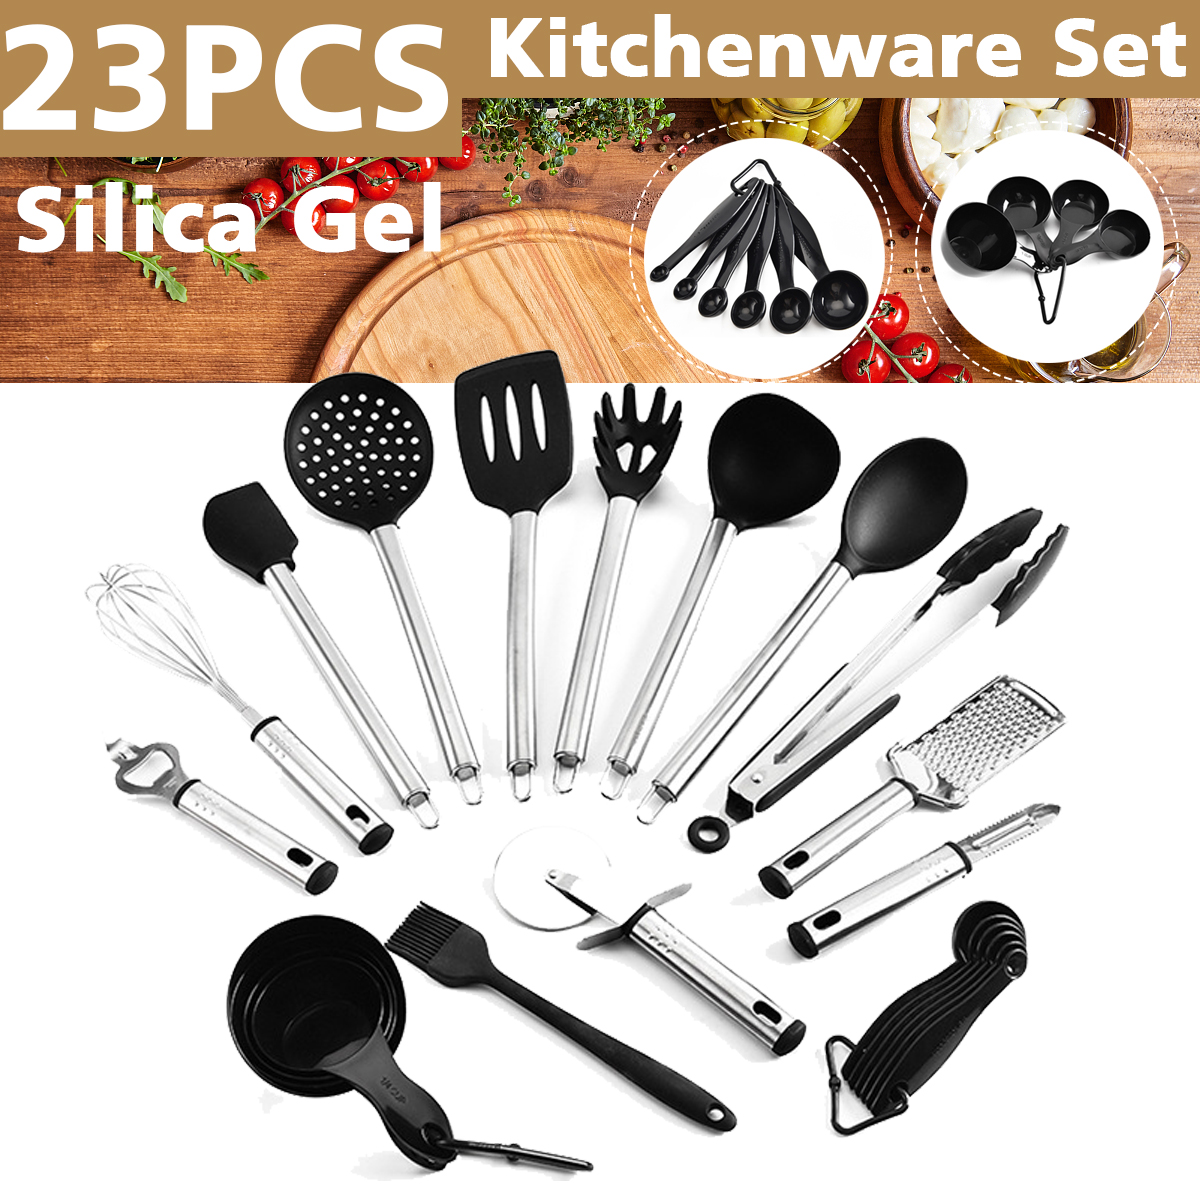 23pcs-Steel-Handle-Silicone-Non-Stick-Pan-Spoon-Utensils-Kitchenware-Cookware-1686237-1